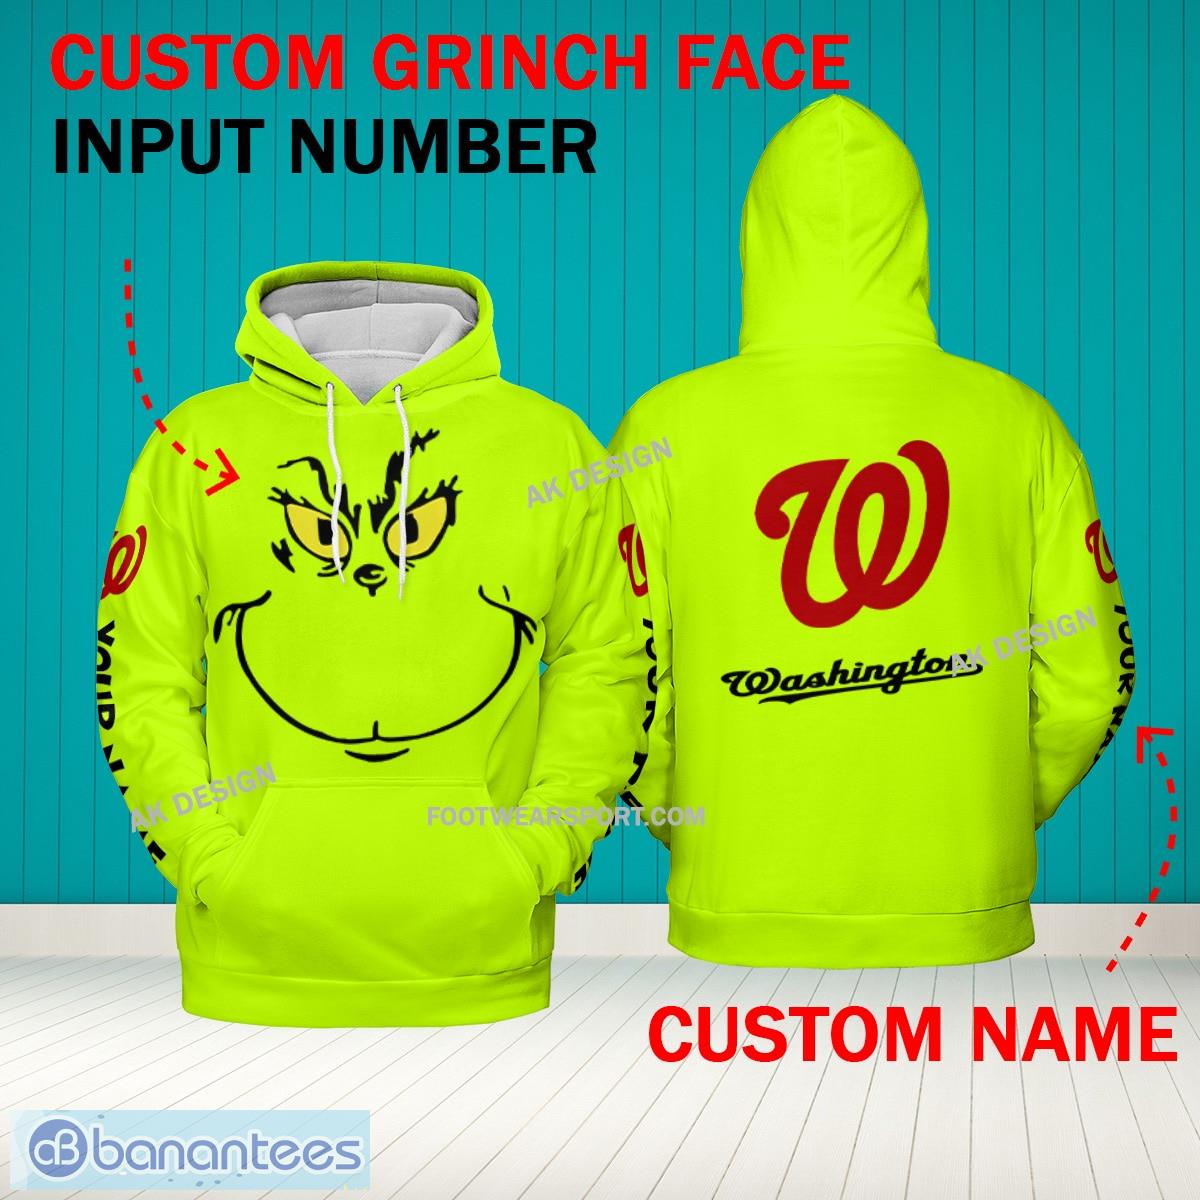 Grinch Face Washington Nationals 3D Hoodie, Zip Hoodie, Sweater Green AOP Custom Number And Name - Grinch Face MLB Washington Nationals 3D Hoodie